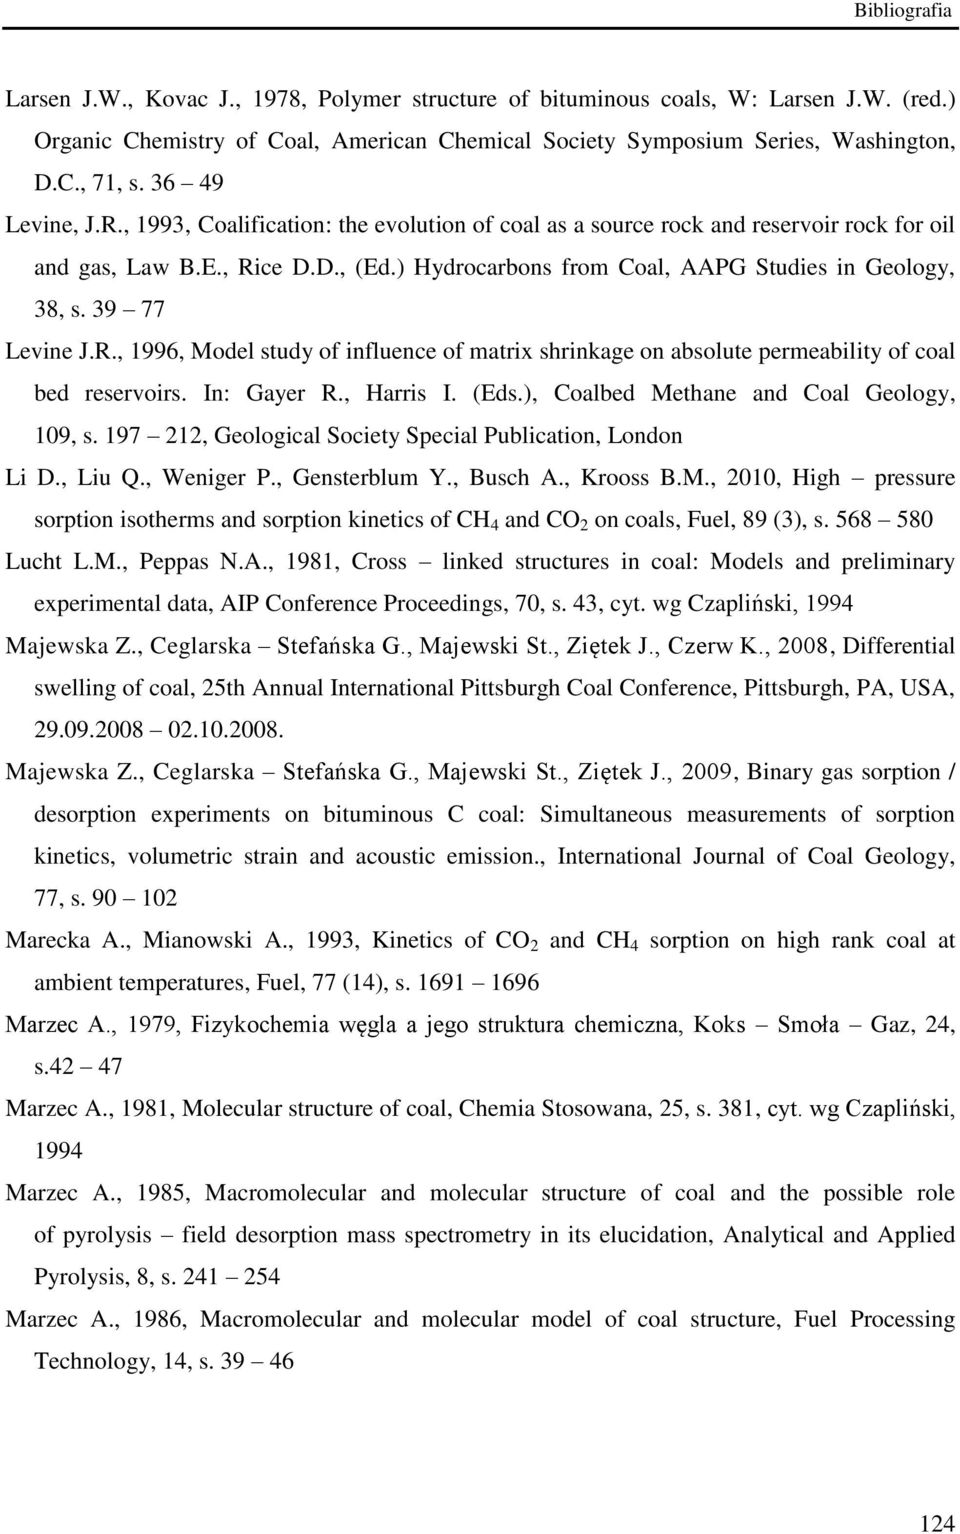 39 77 Levine J.R., 1996, Model study of influence of matrix shrinkage on absolute permeability of coal bed reservoirs. In: Gayer R., Harris I. (Eds.), Coalbed Methane and Coal Geology, 109, s.